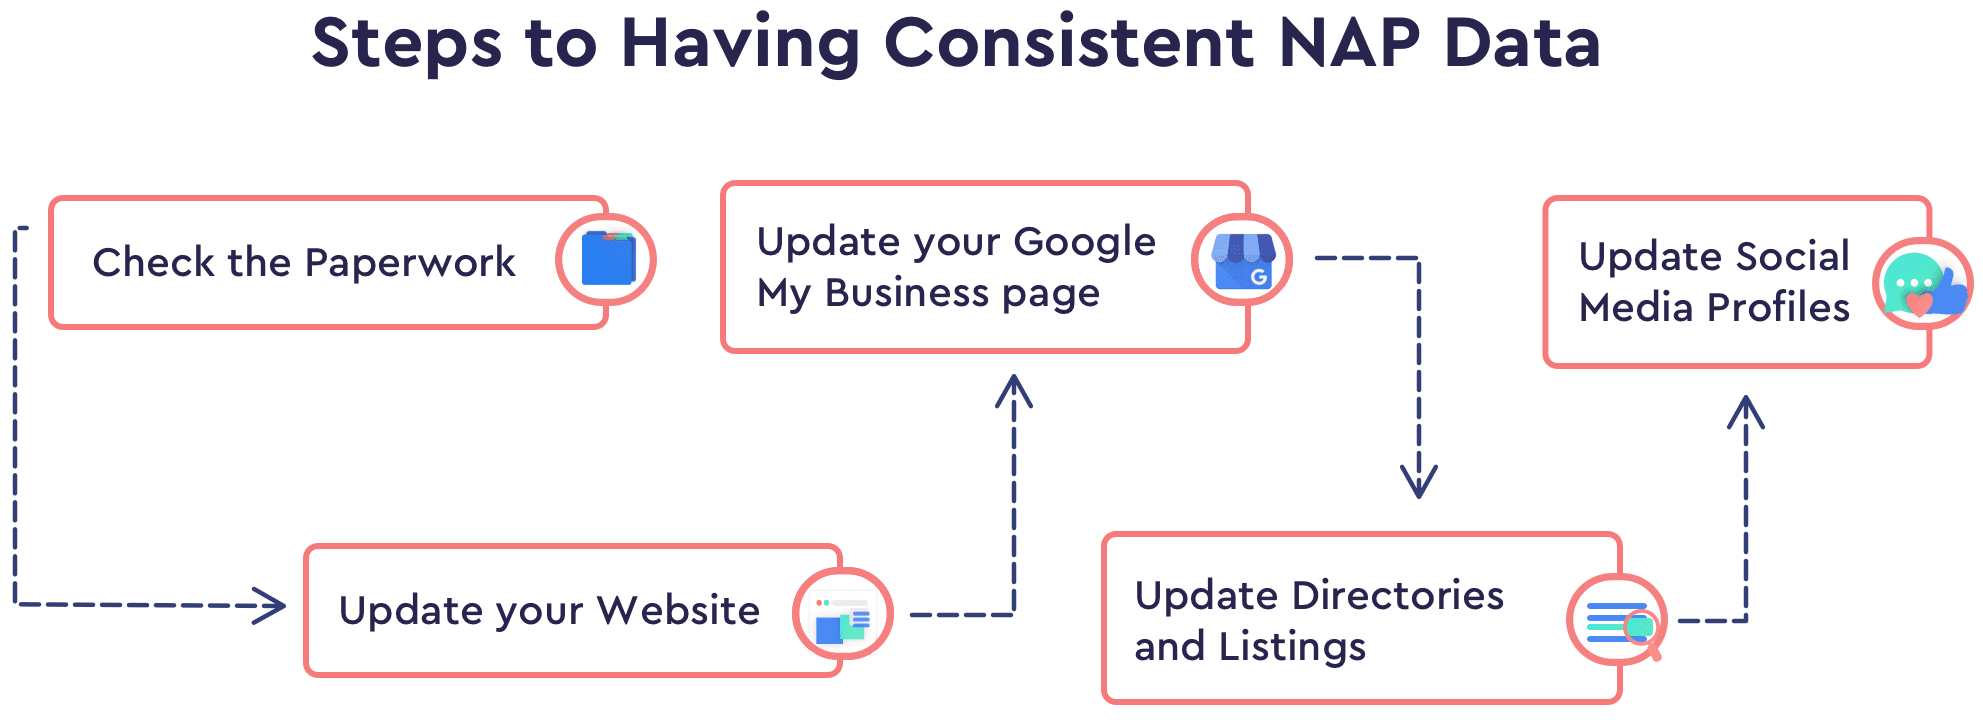 Steps to Consistent NAP data